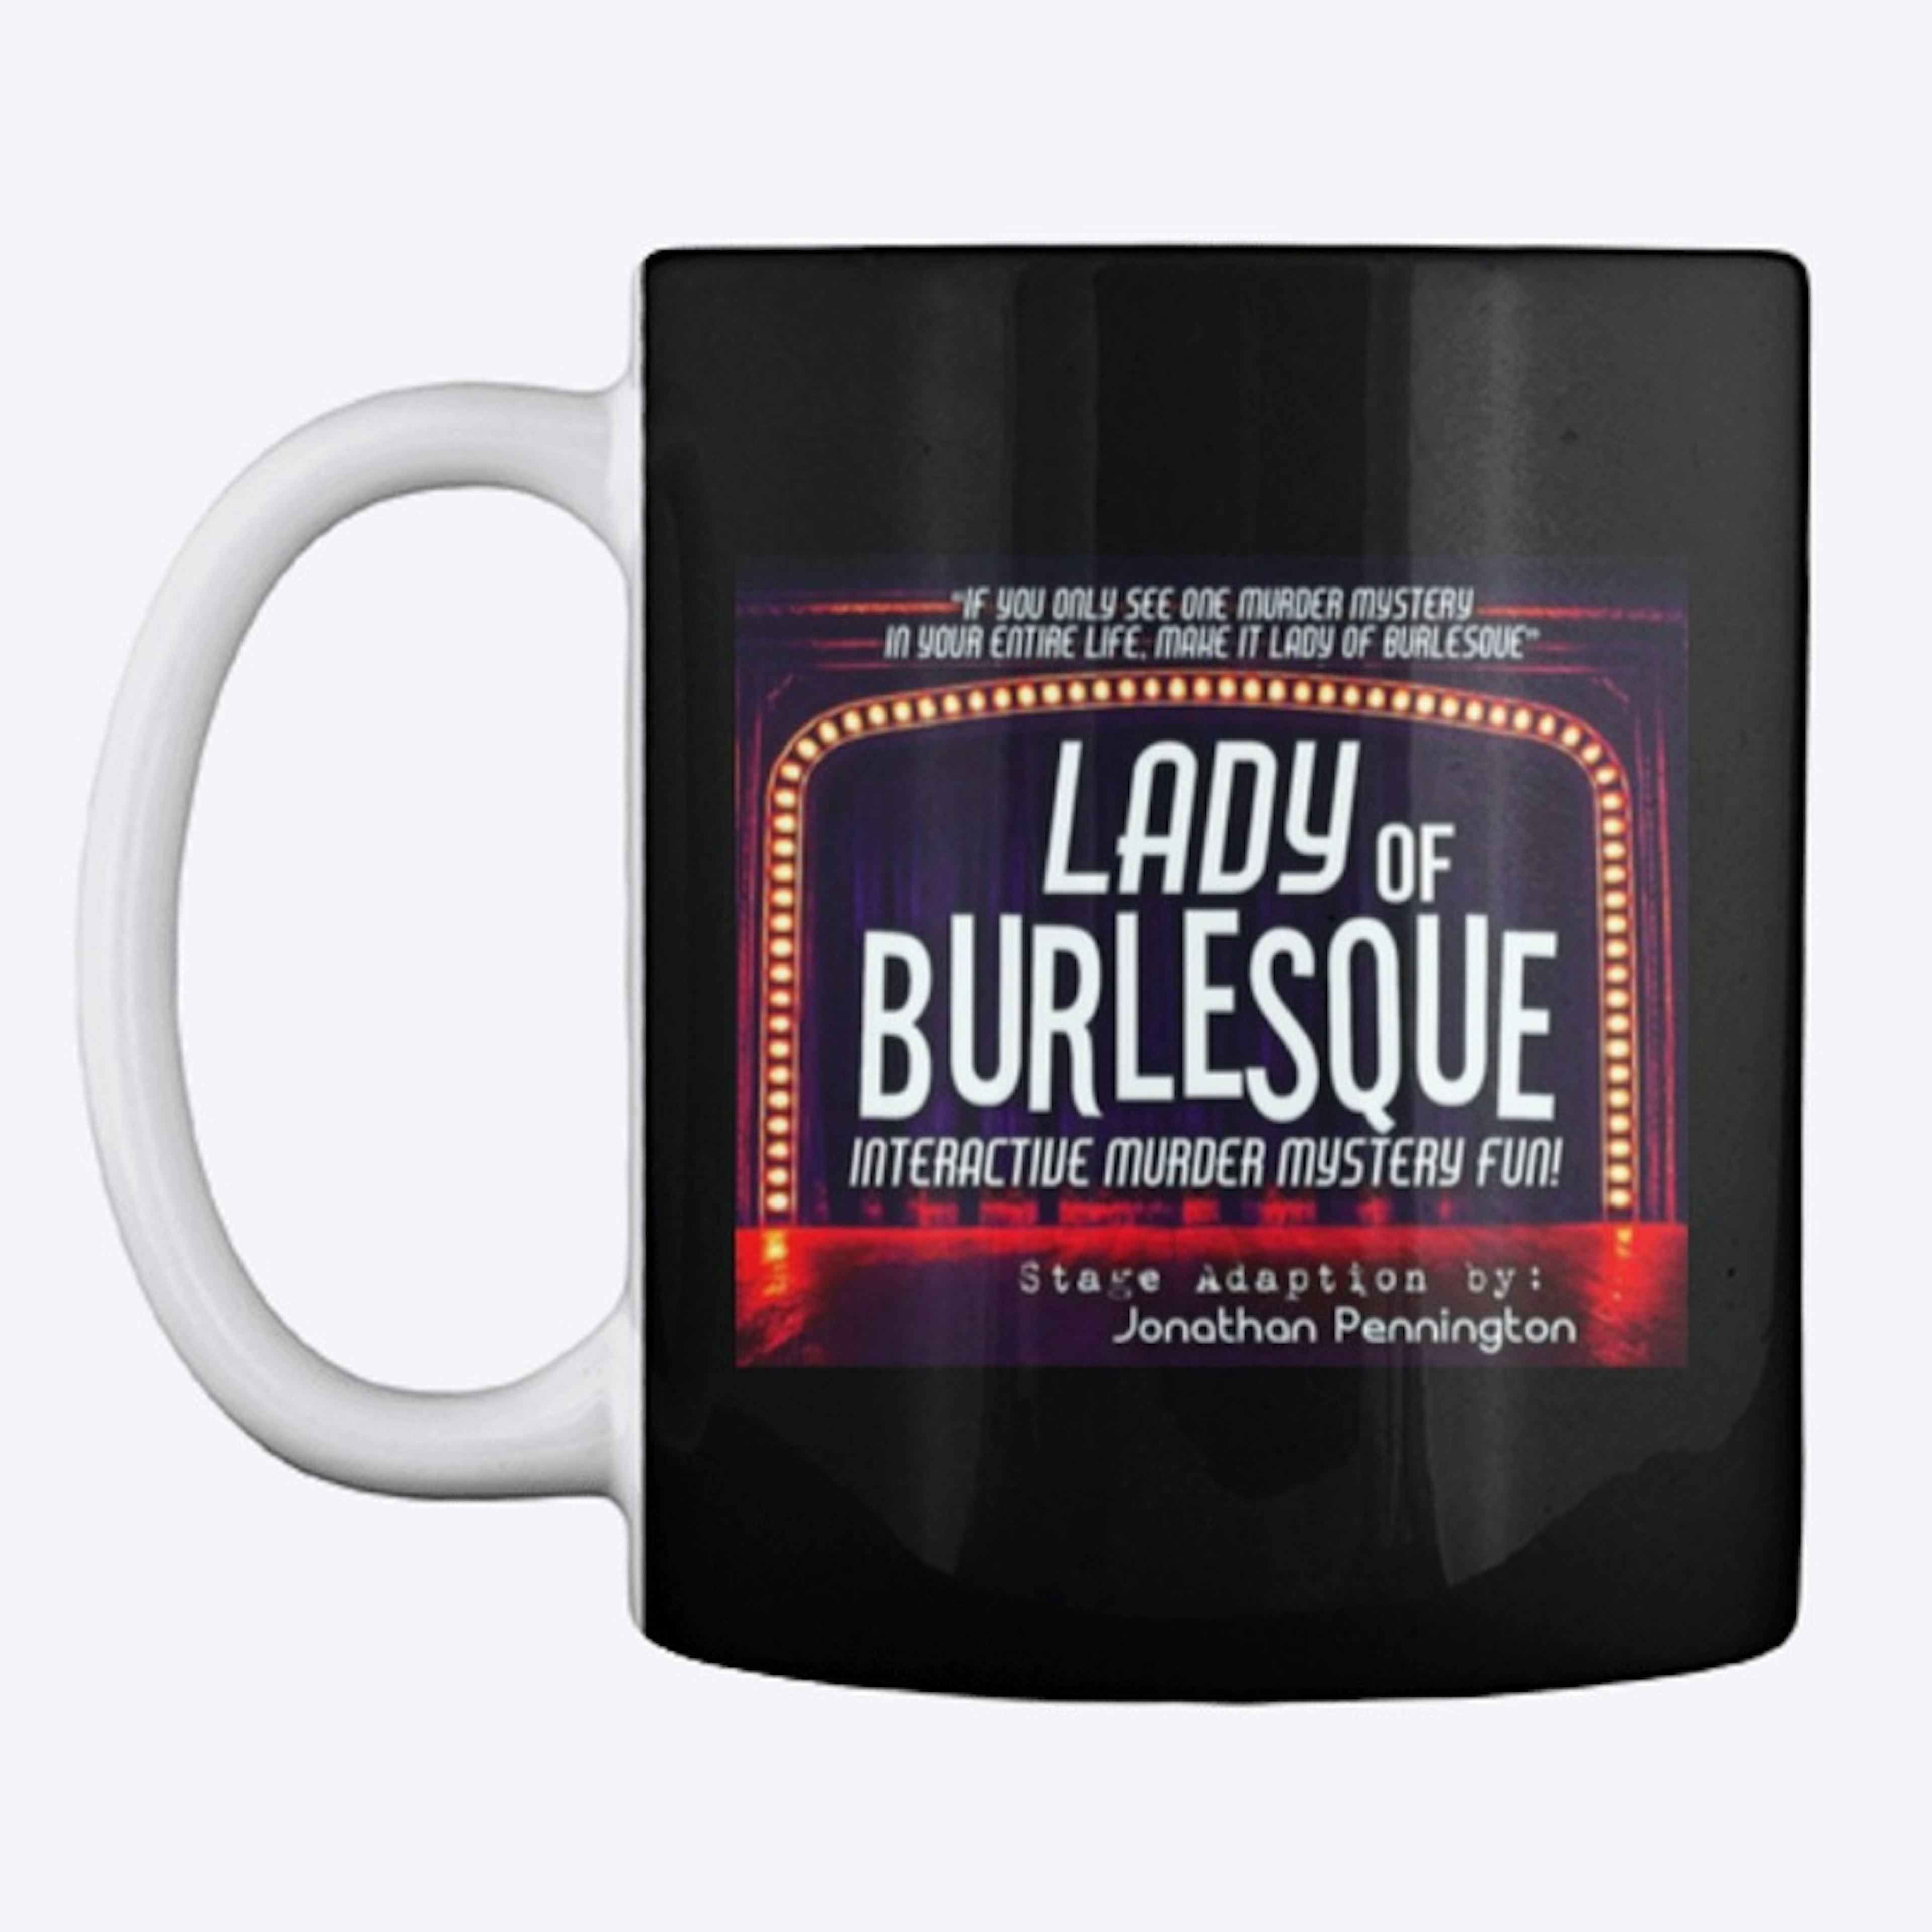 LADY OF BURLESQUE: